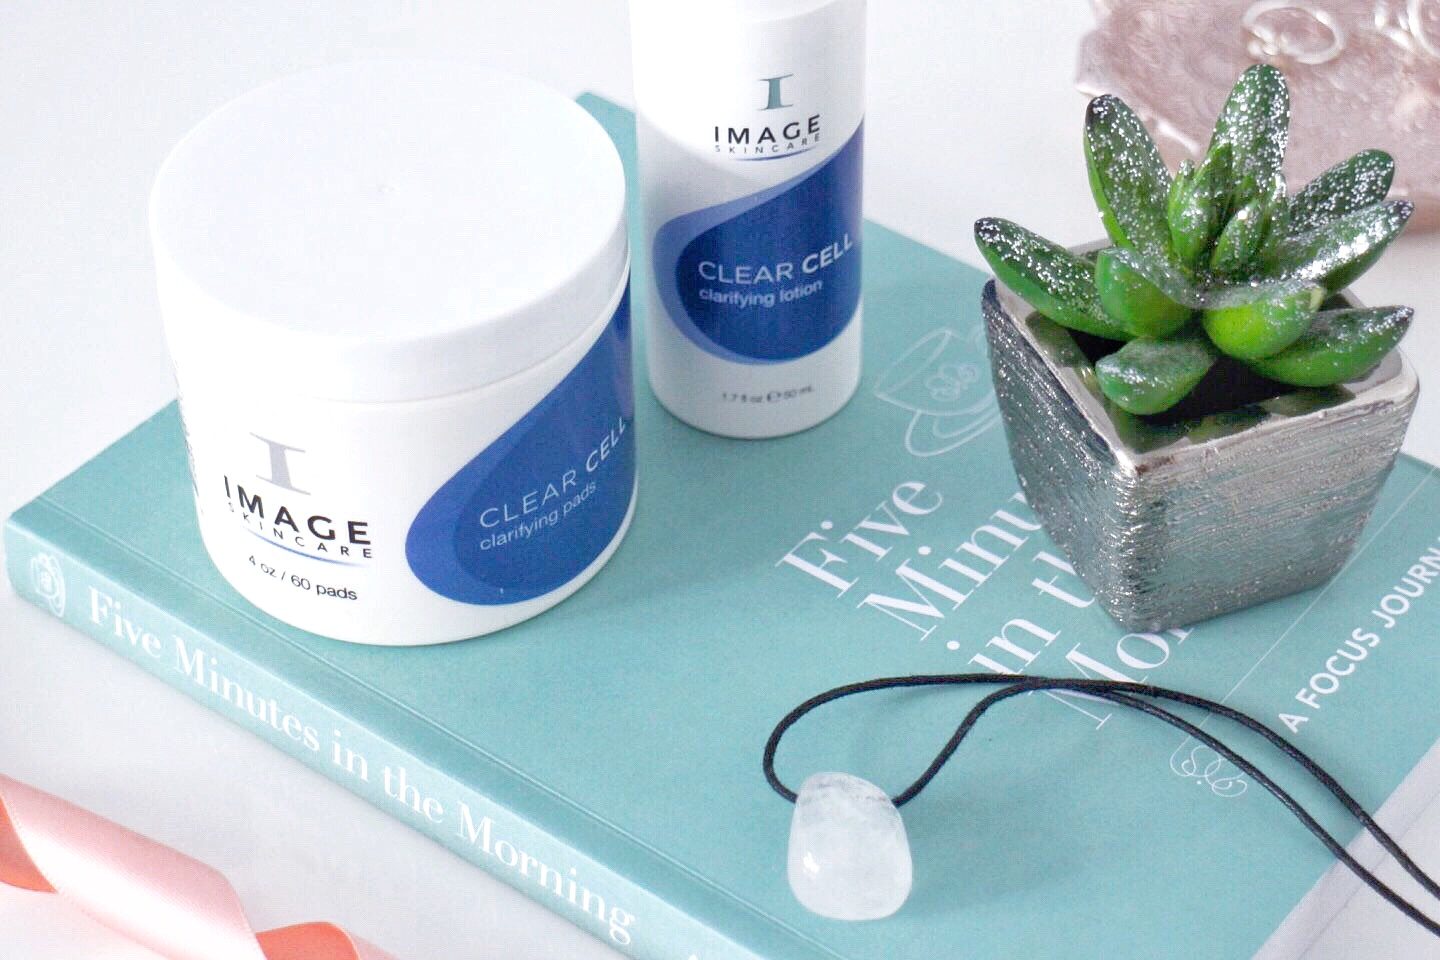 Image Skincare Clear Cell Review